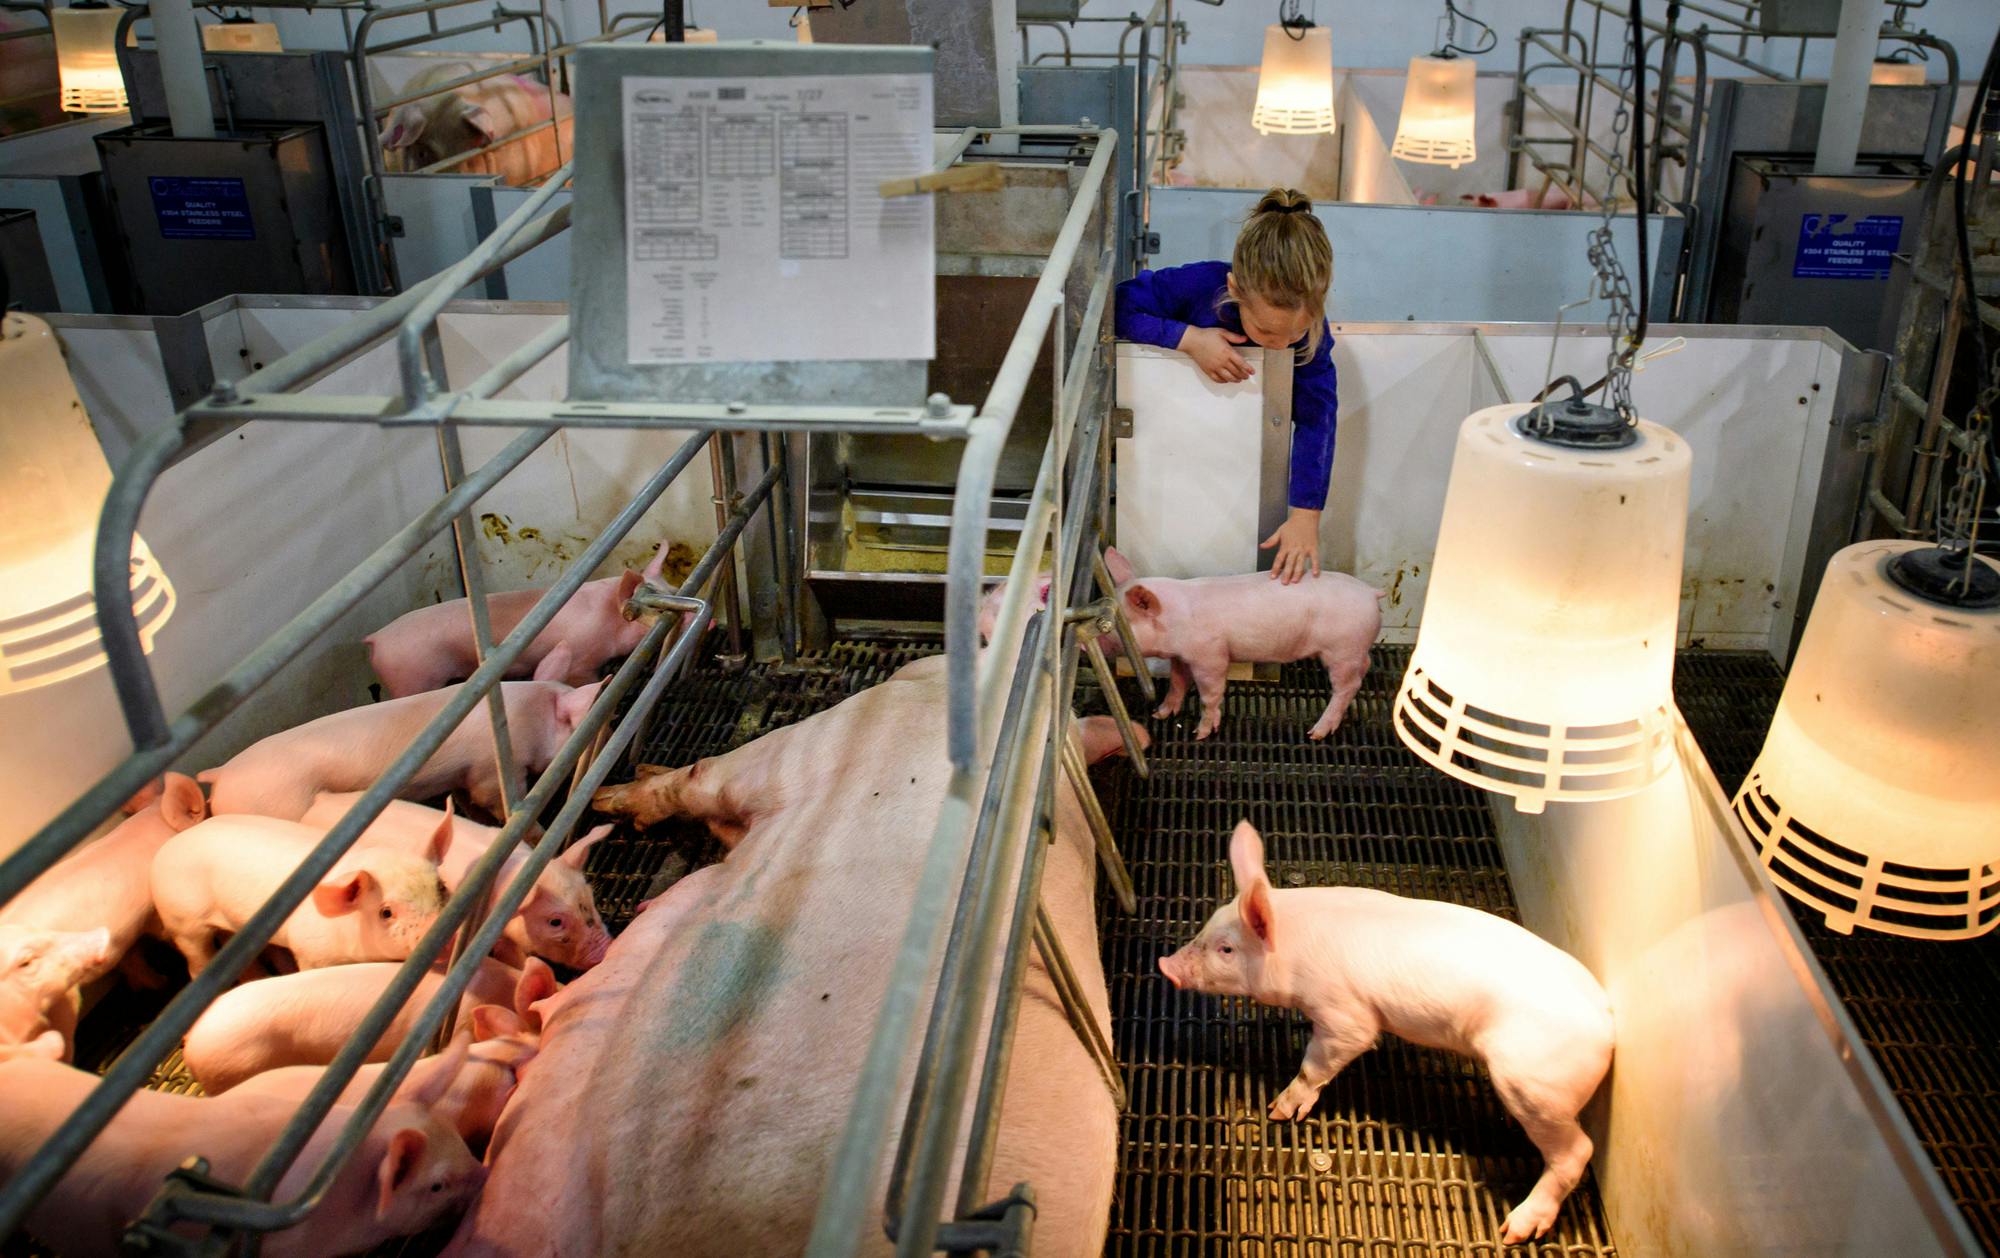 More shoppers are demanding ethical treatment of farm animals